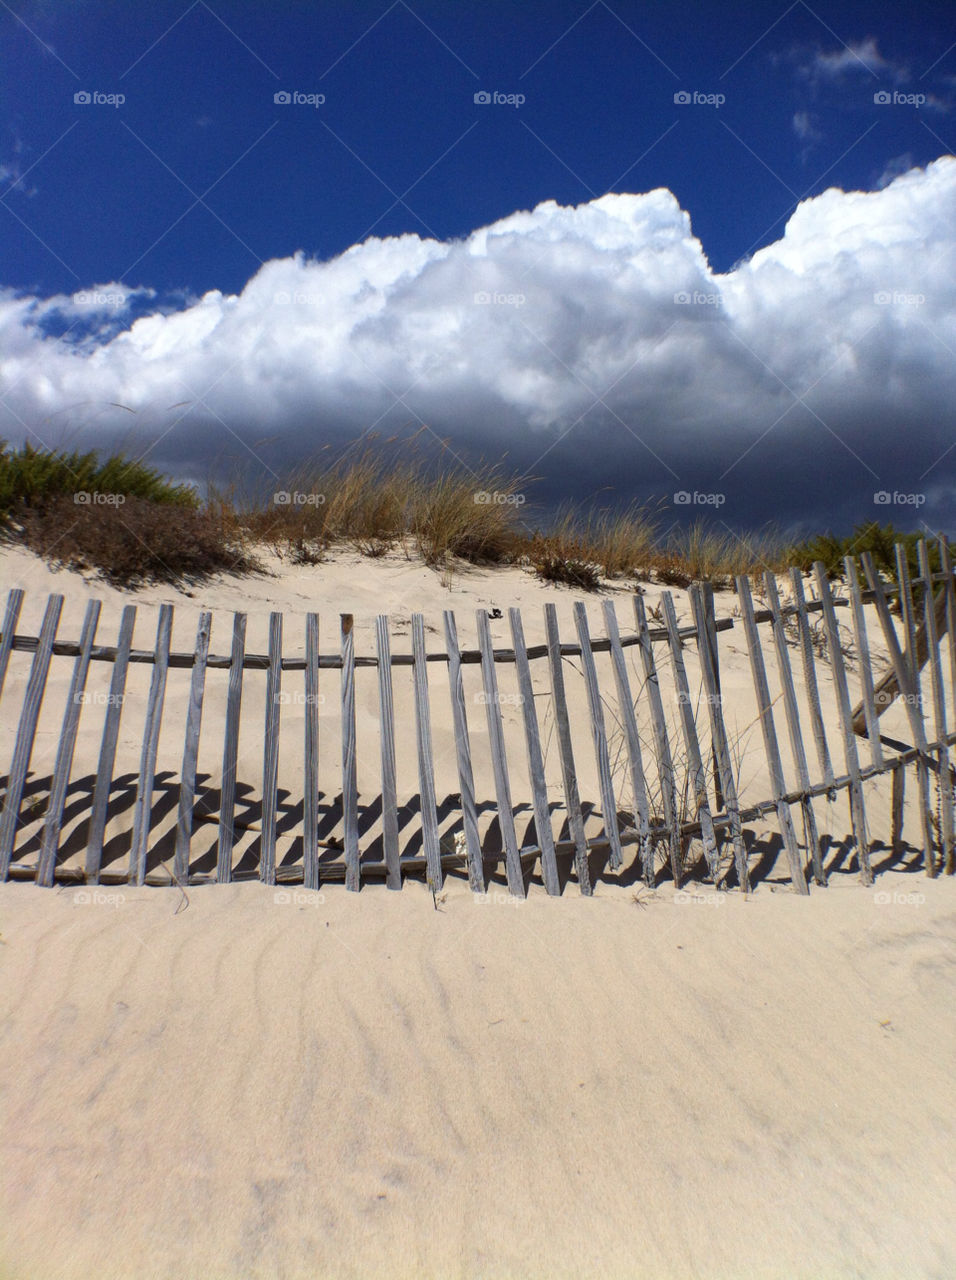 beach summer fence clouds by themuttley